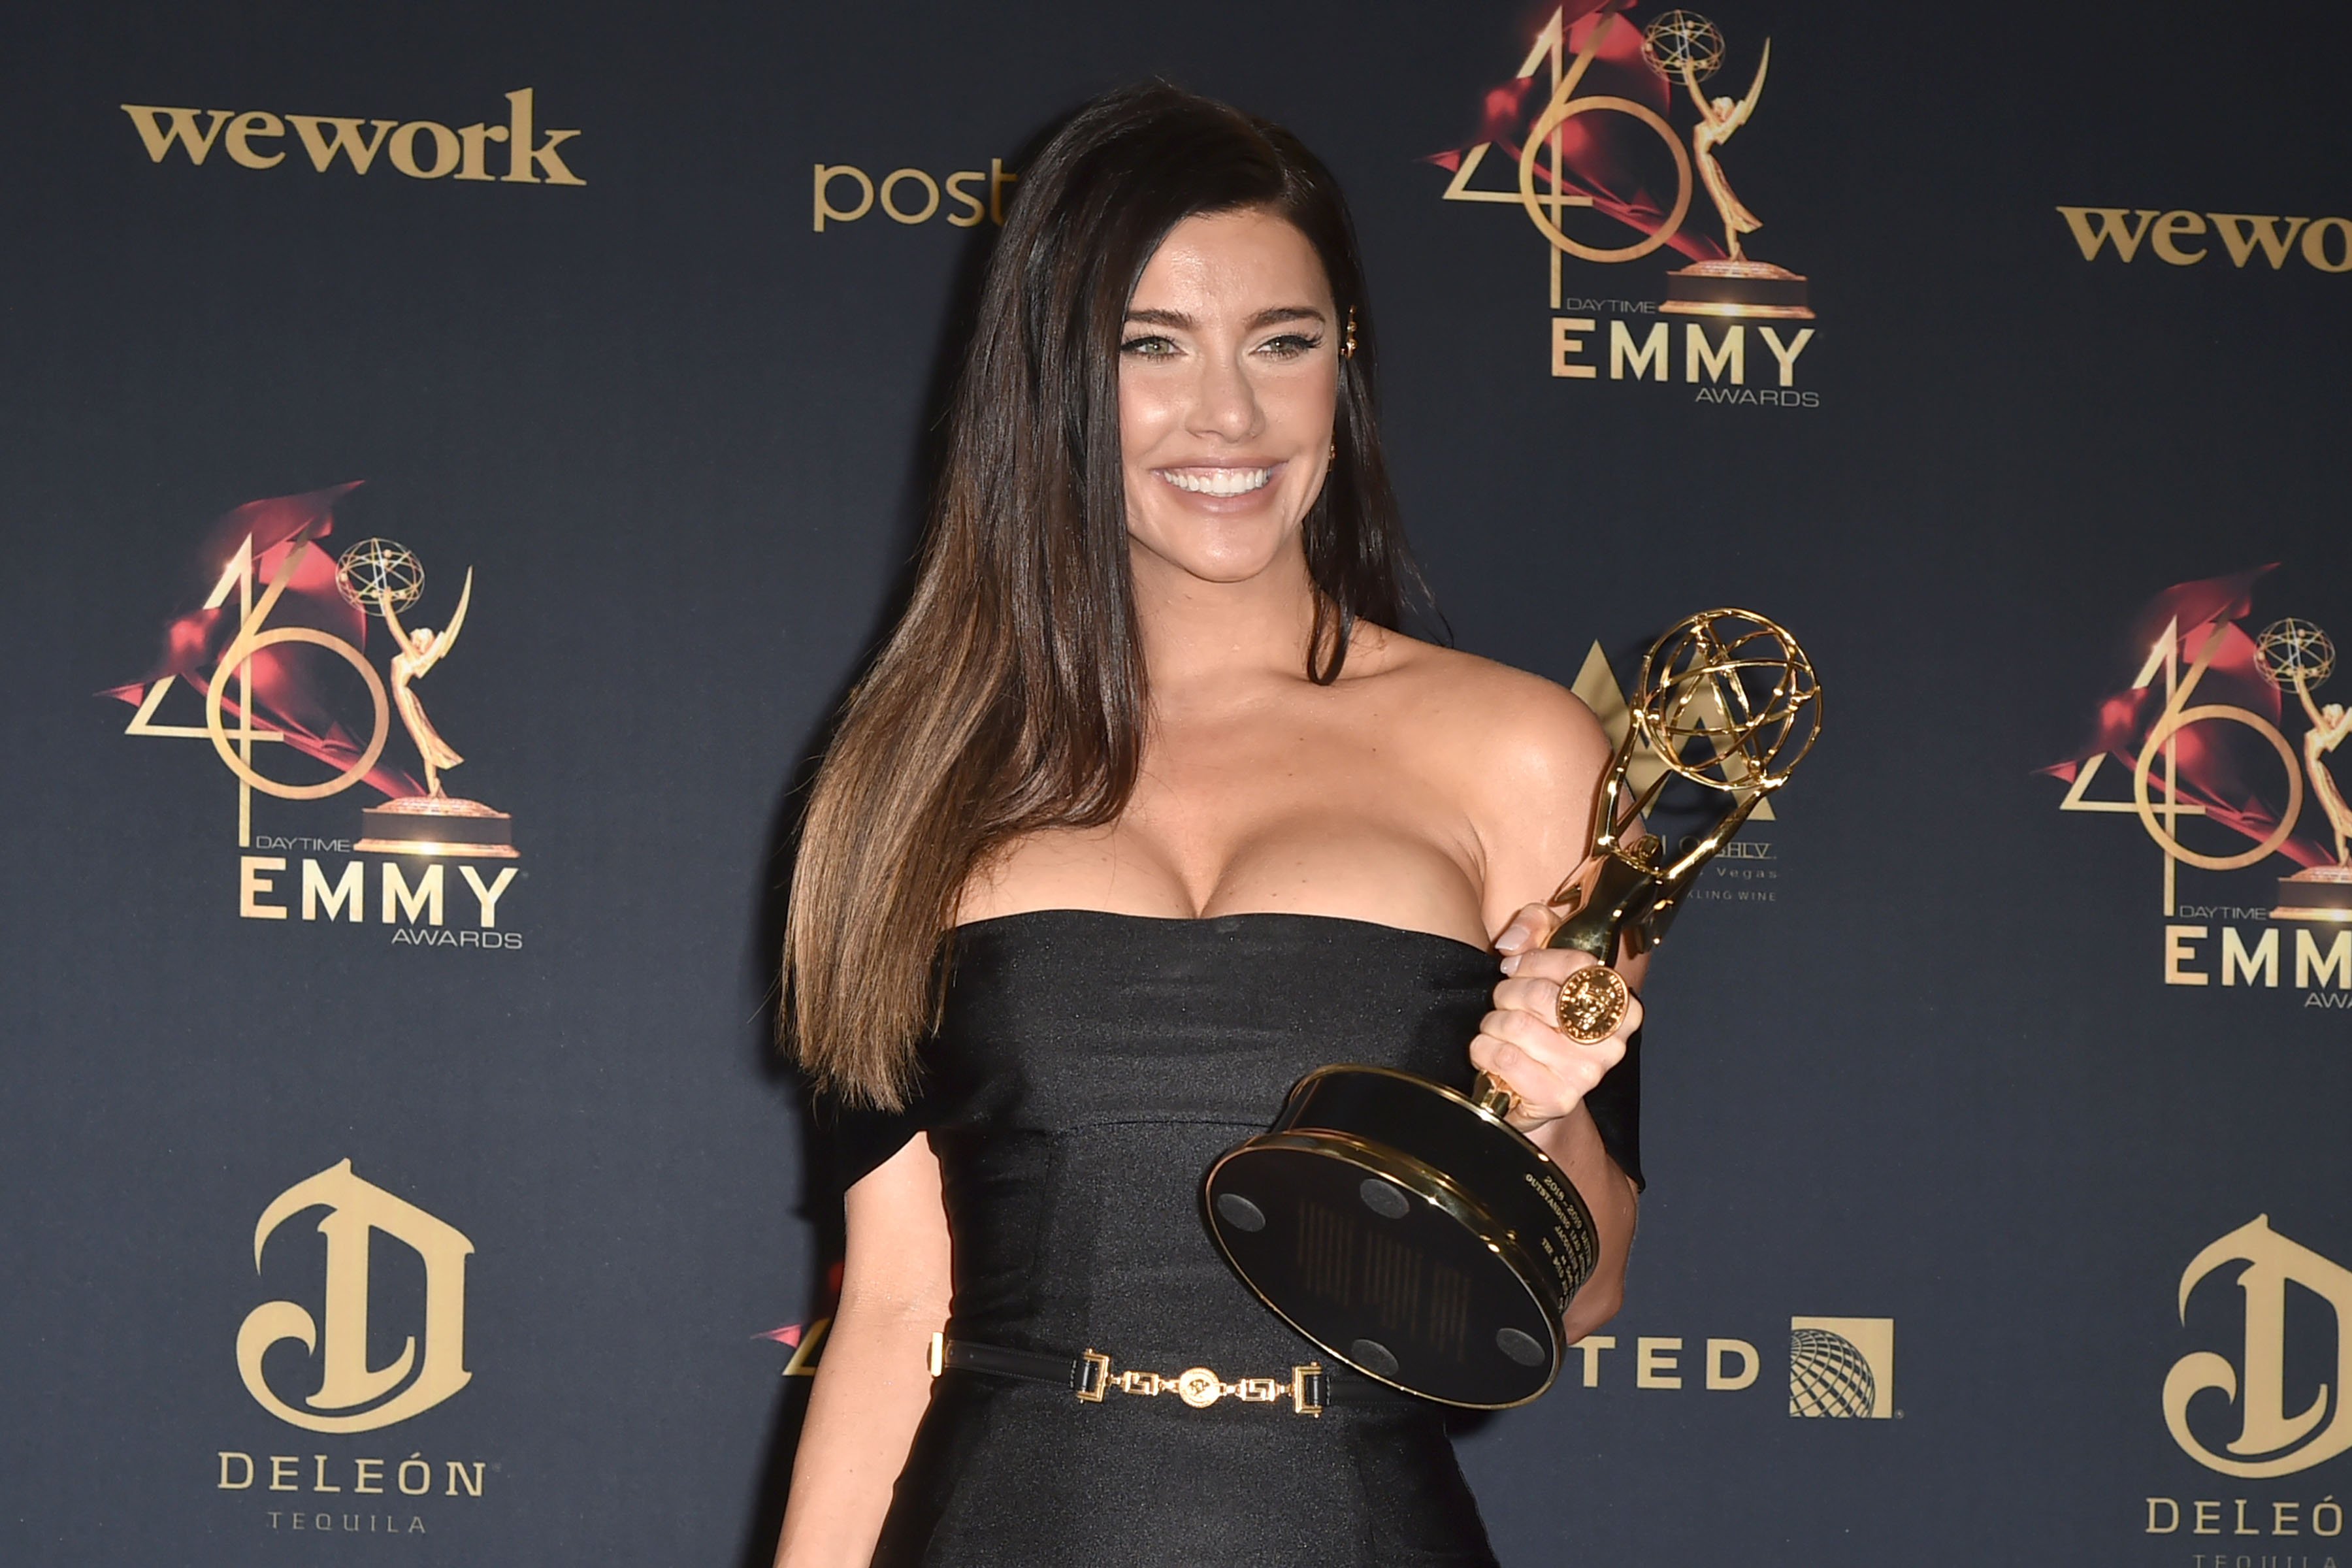 'The Bold and the Beautiful' character Steffy Forrester's Monaco outfit is receiving criticism.